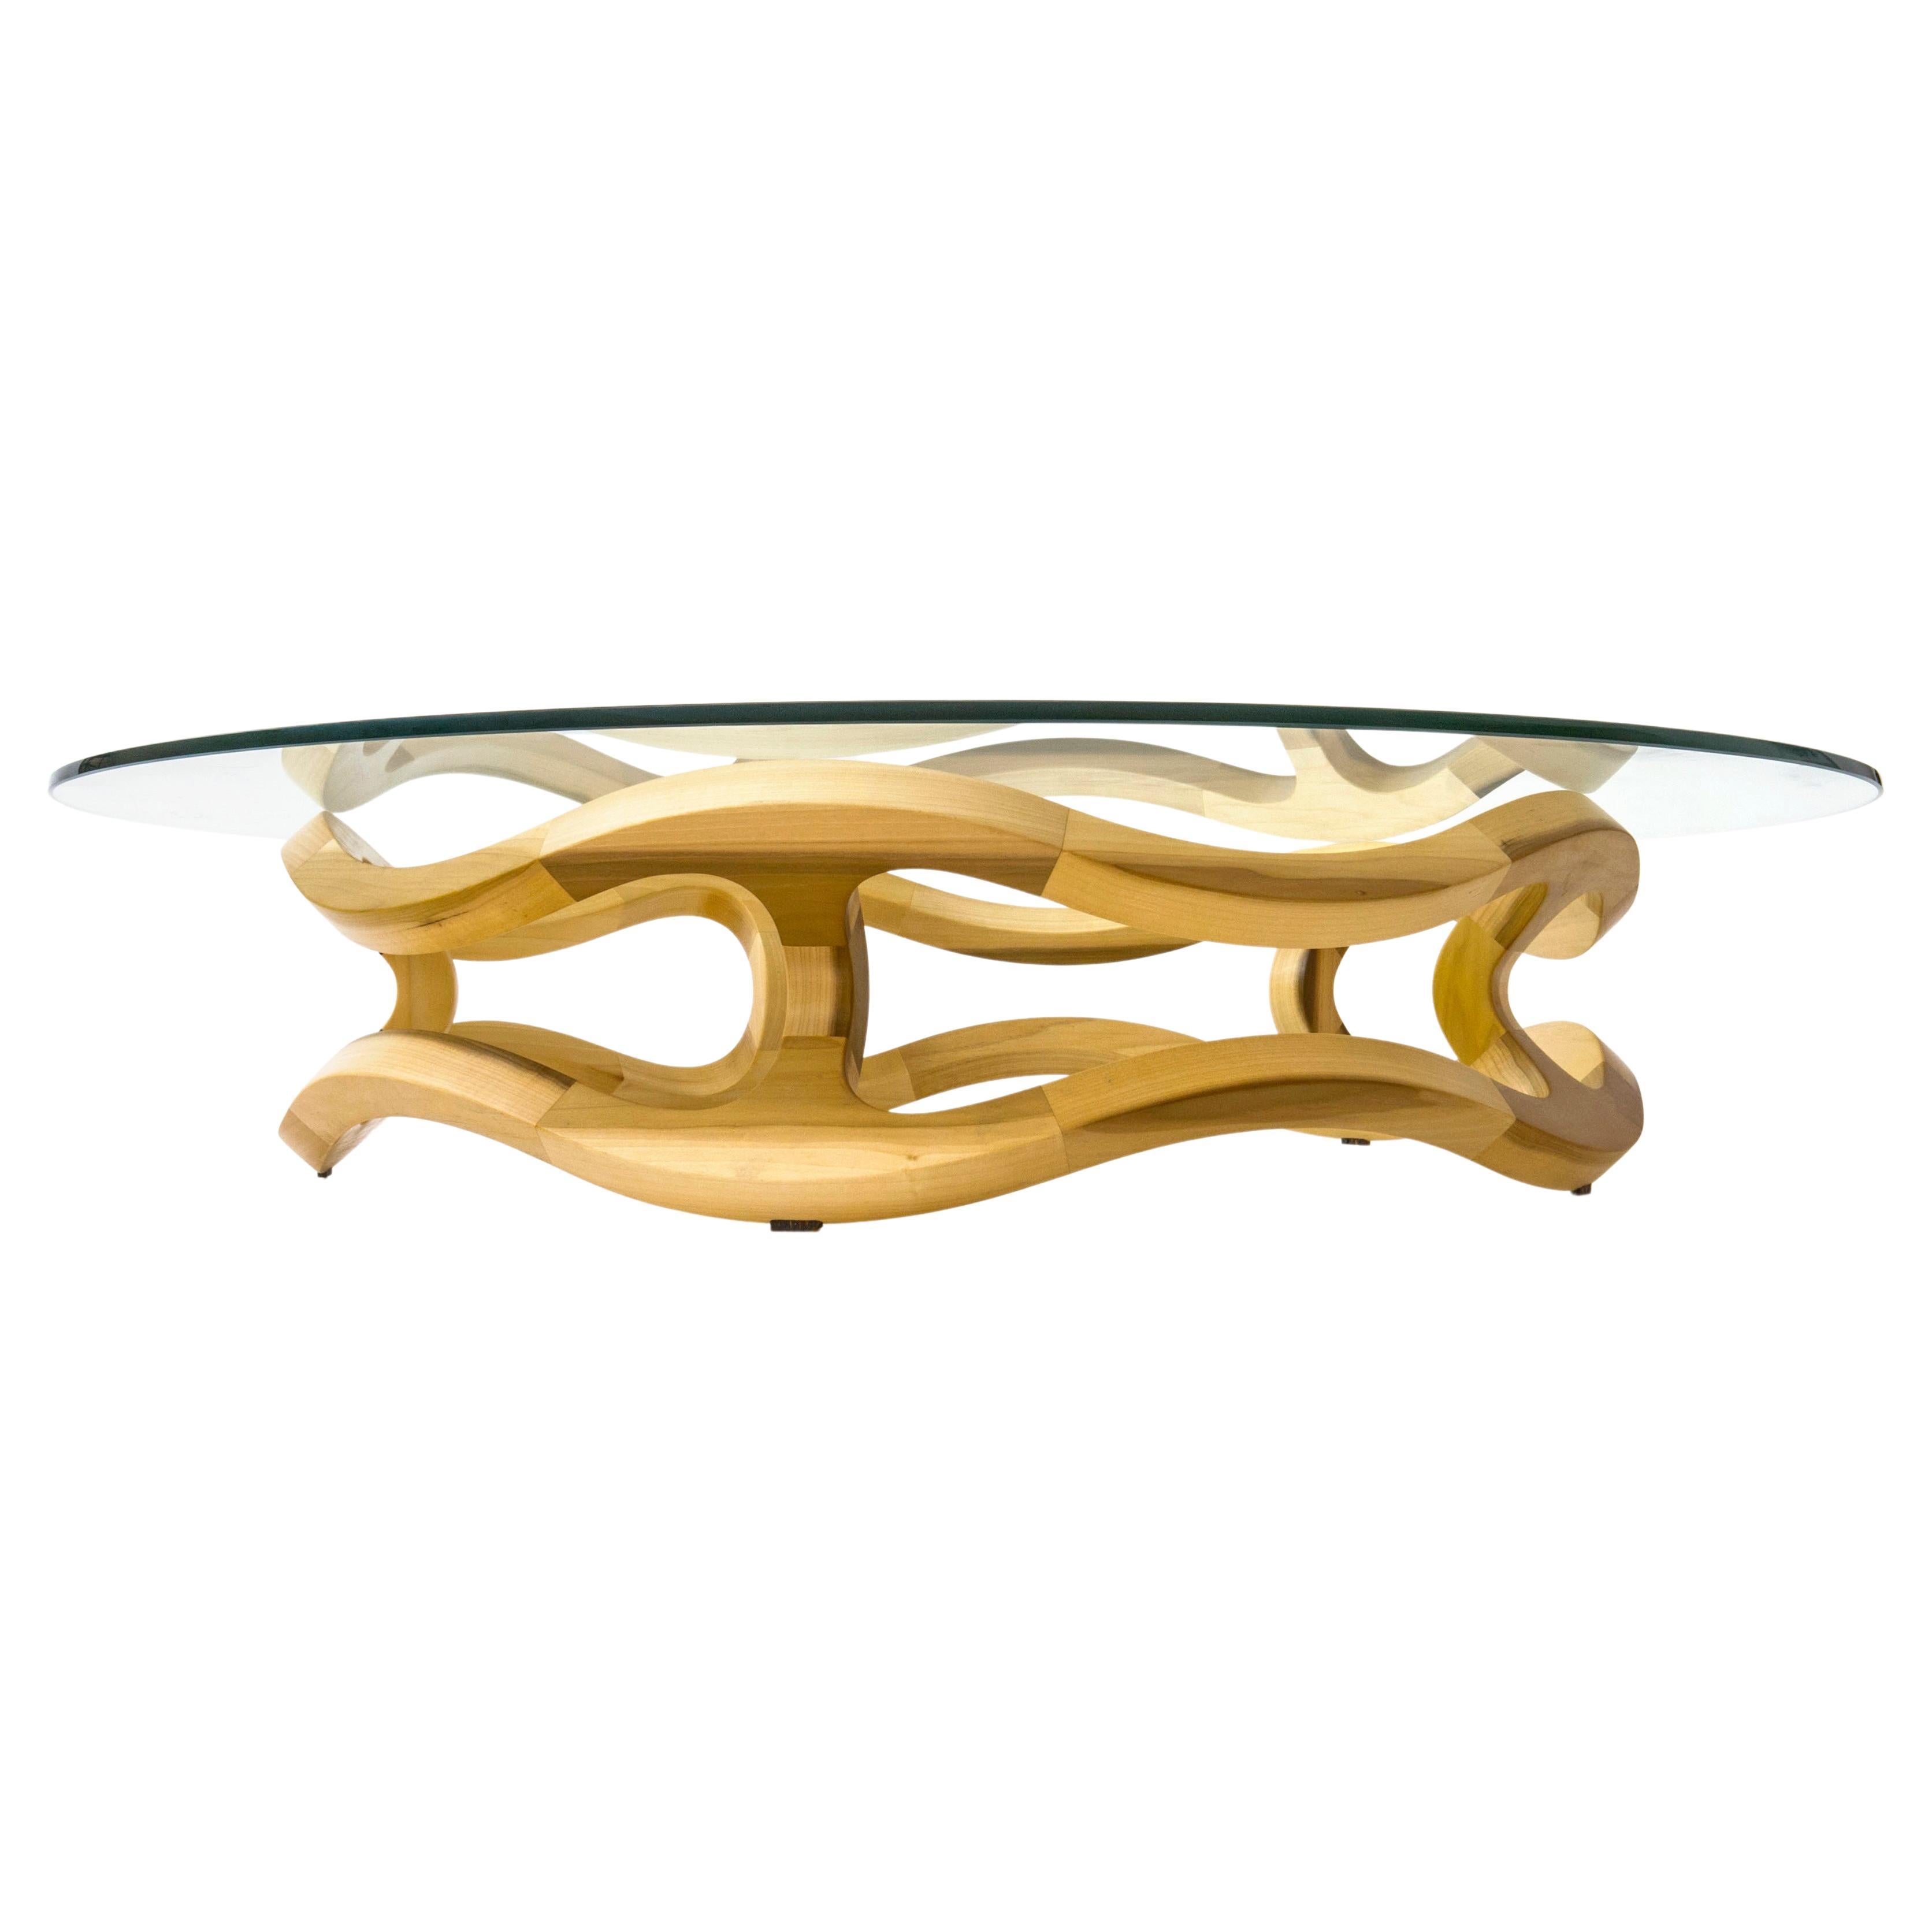 Flamenca, Geometric Sculptural Center Table Made of Solid Wood by Pedro Cerisola For Sale